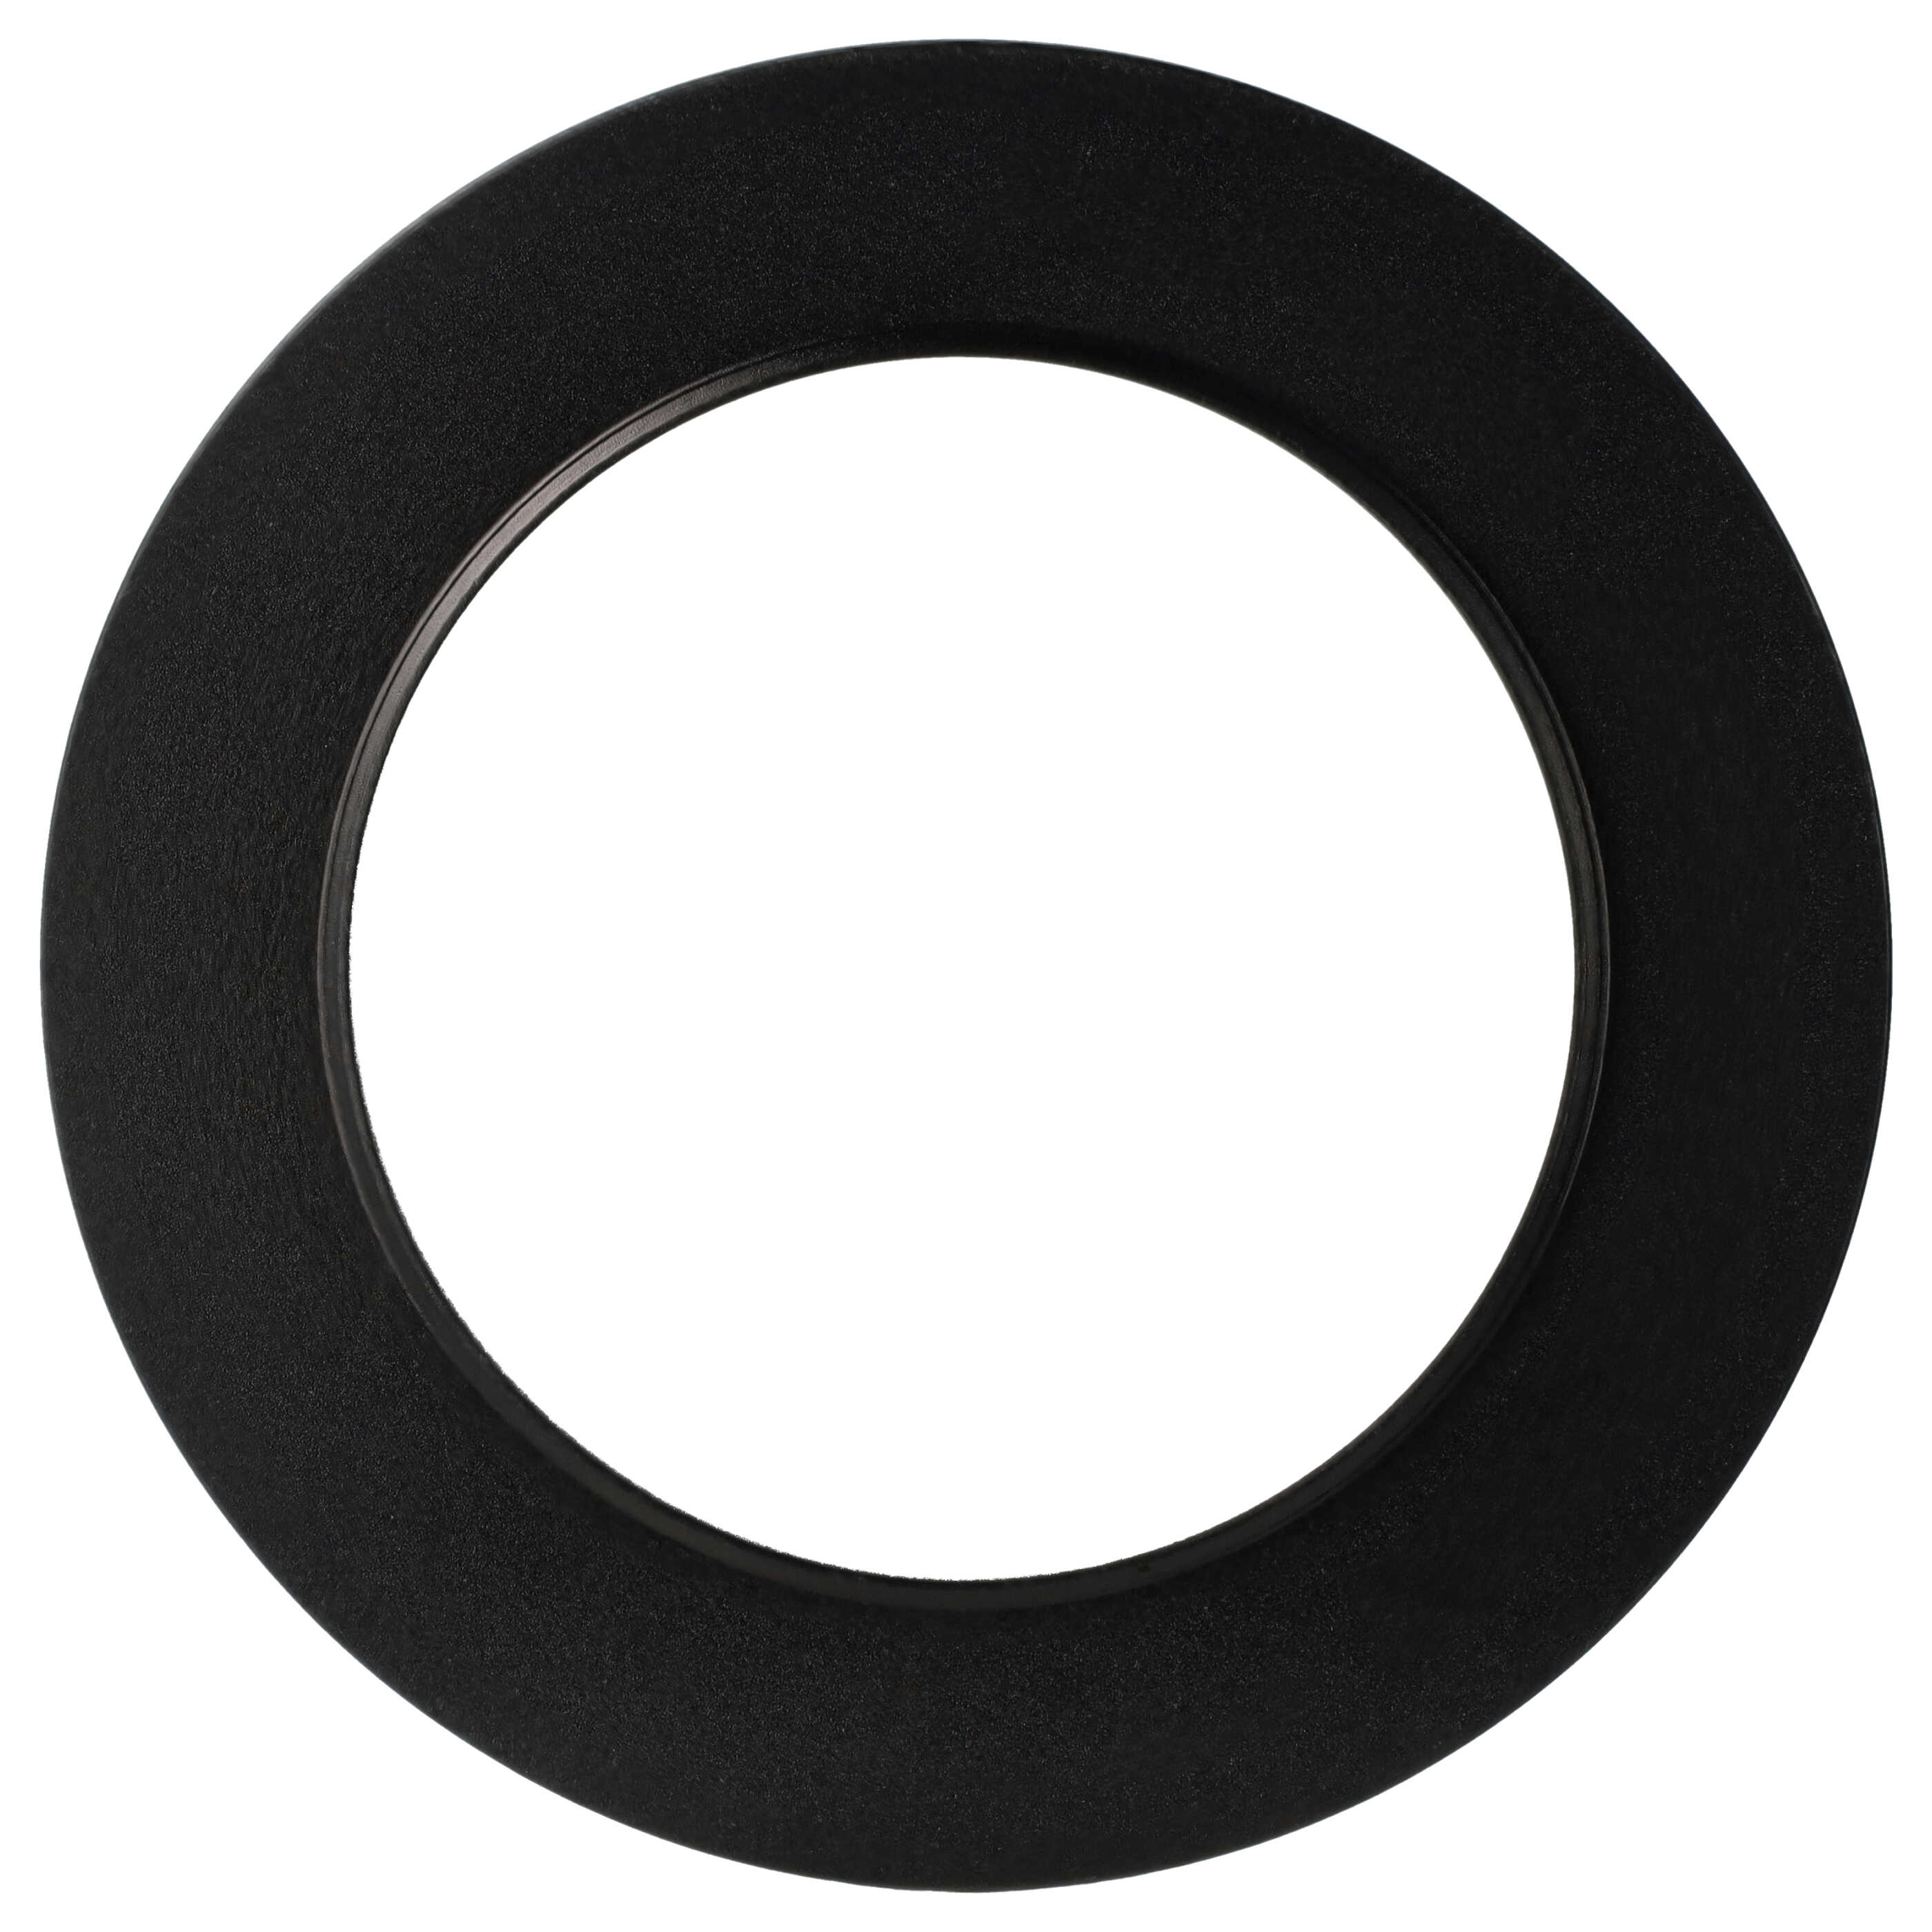 Step-Up Ring Adapter of 58 mm to 82 mmfor various Camera Lens - Filter Adapter